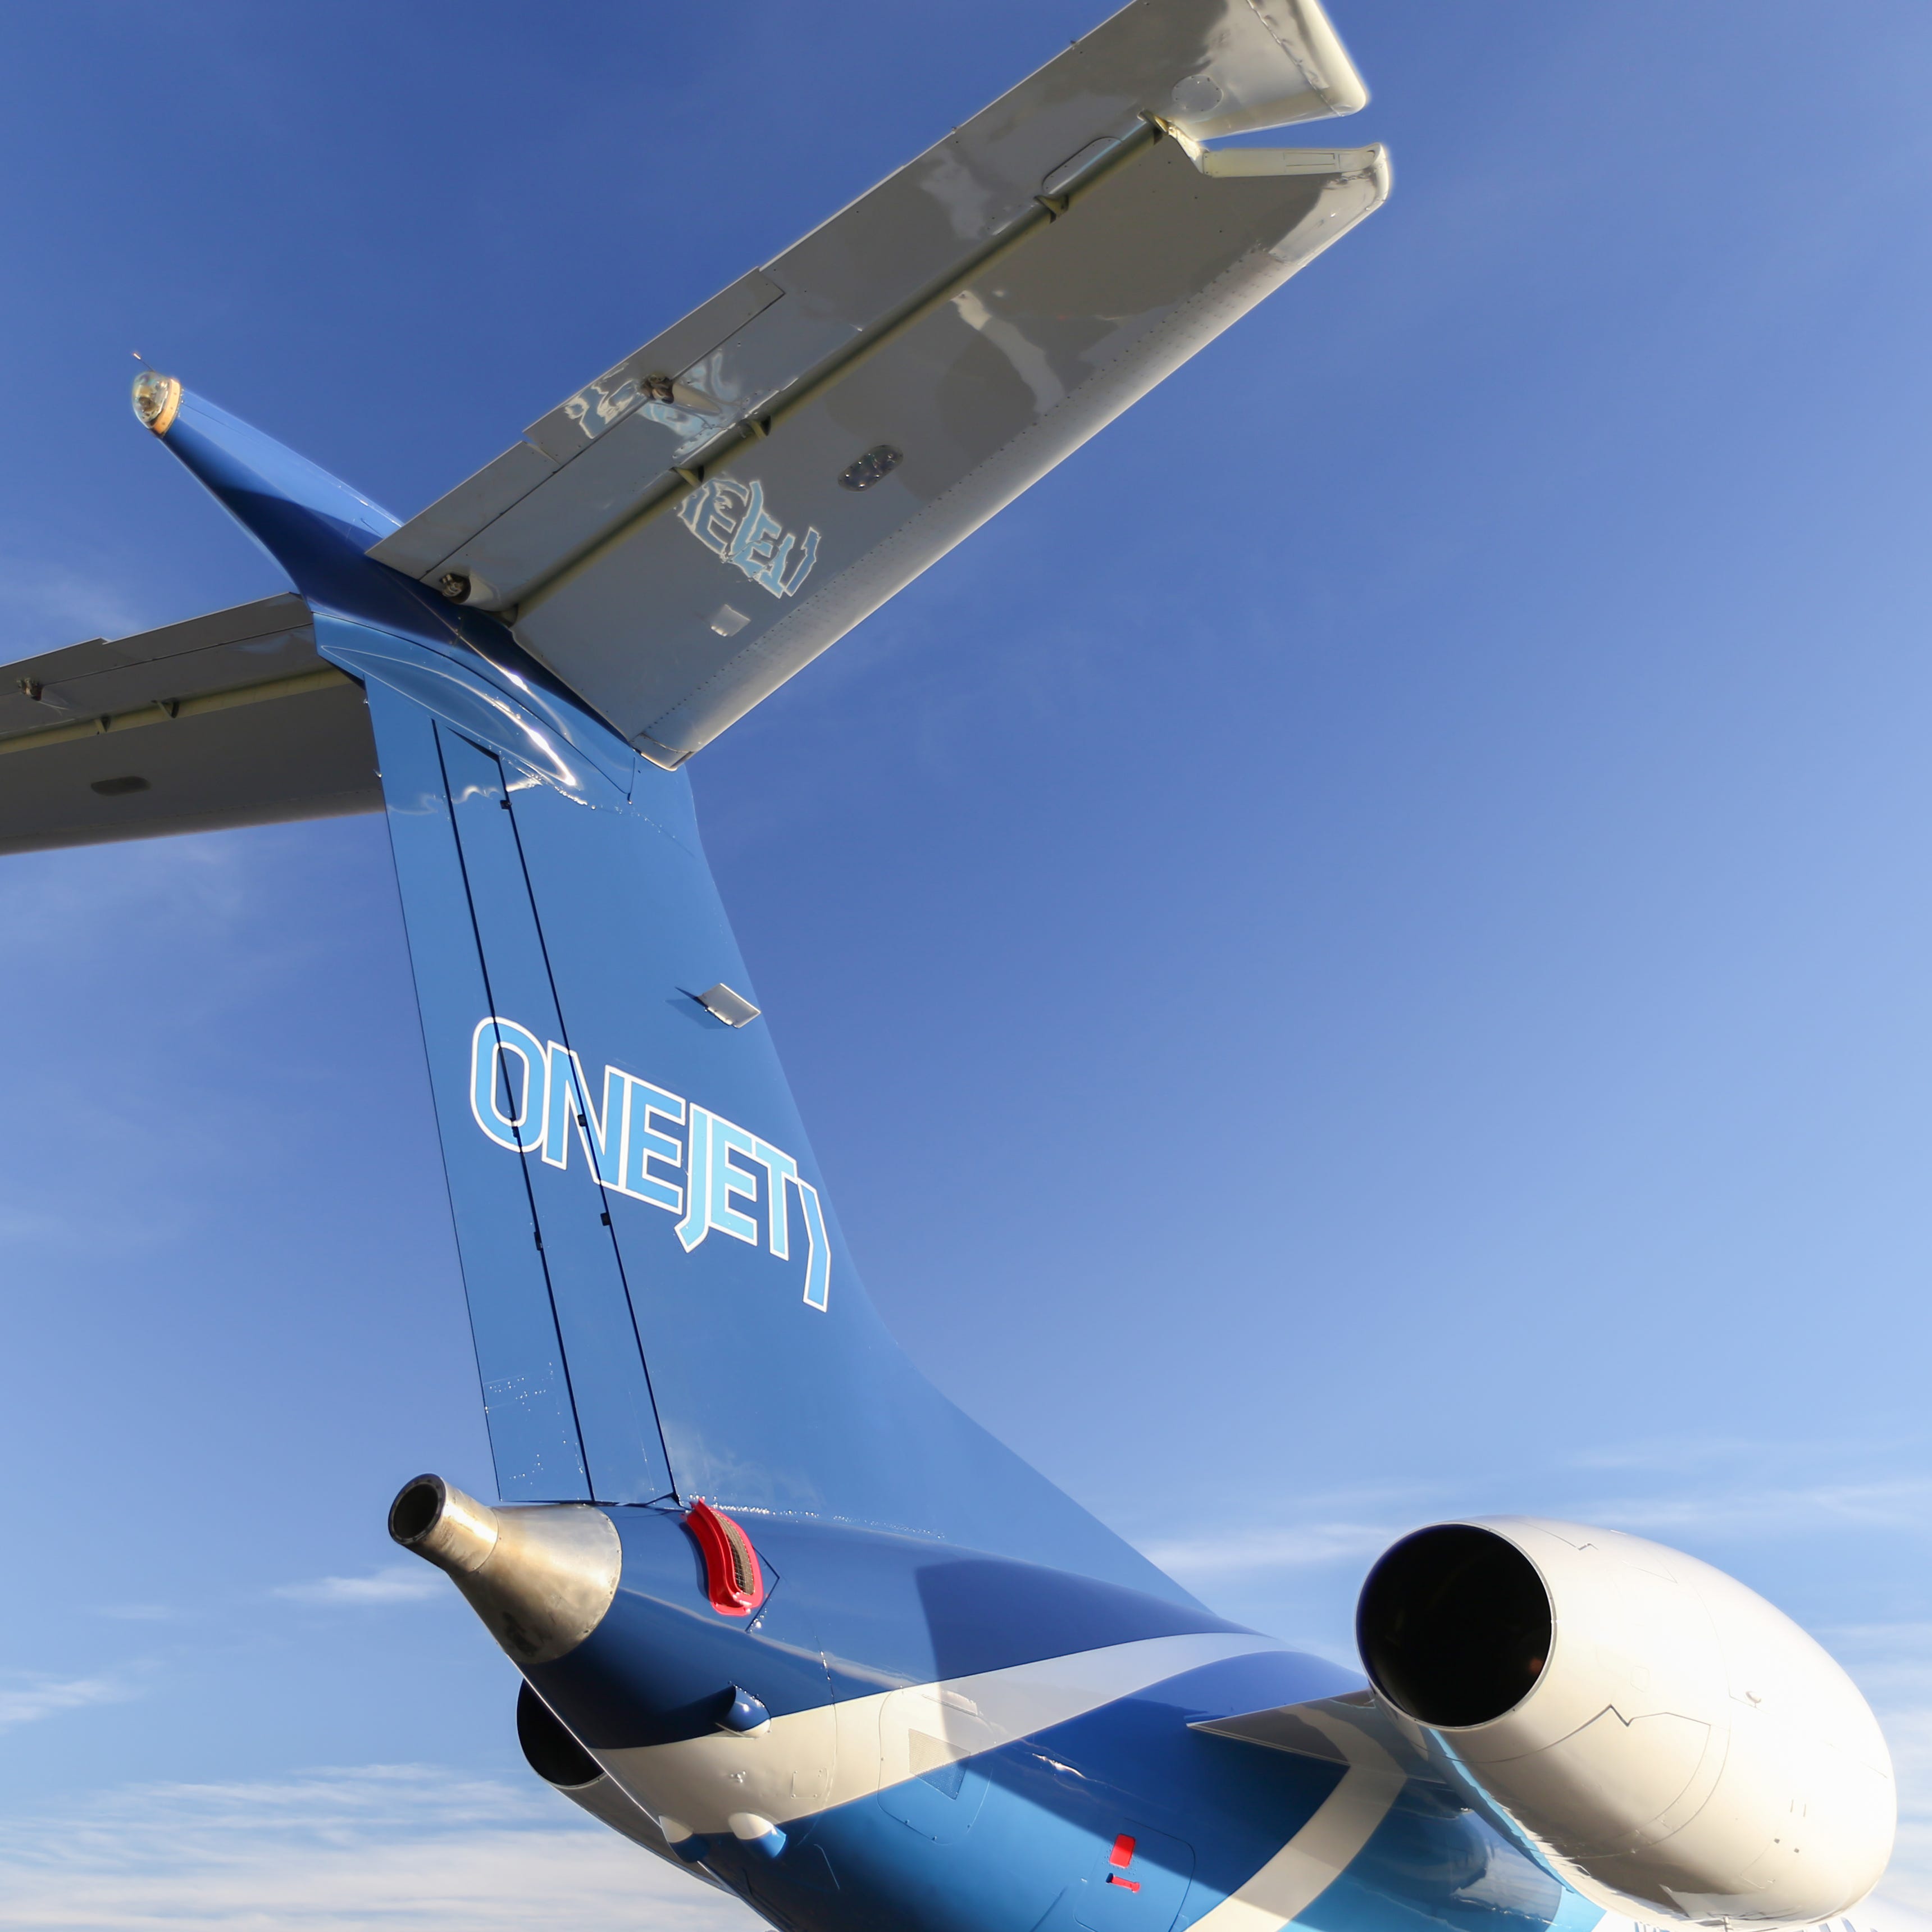 This image, provided by OneJet, shows and Embraer regional jet in the company's color.